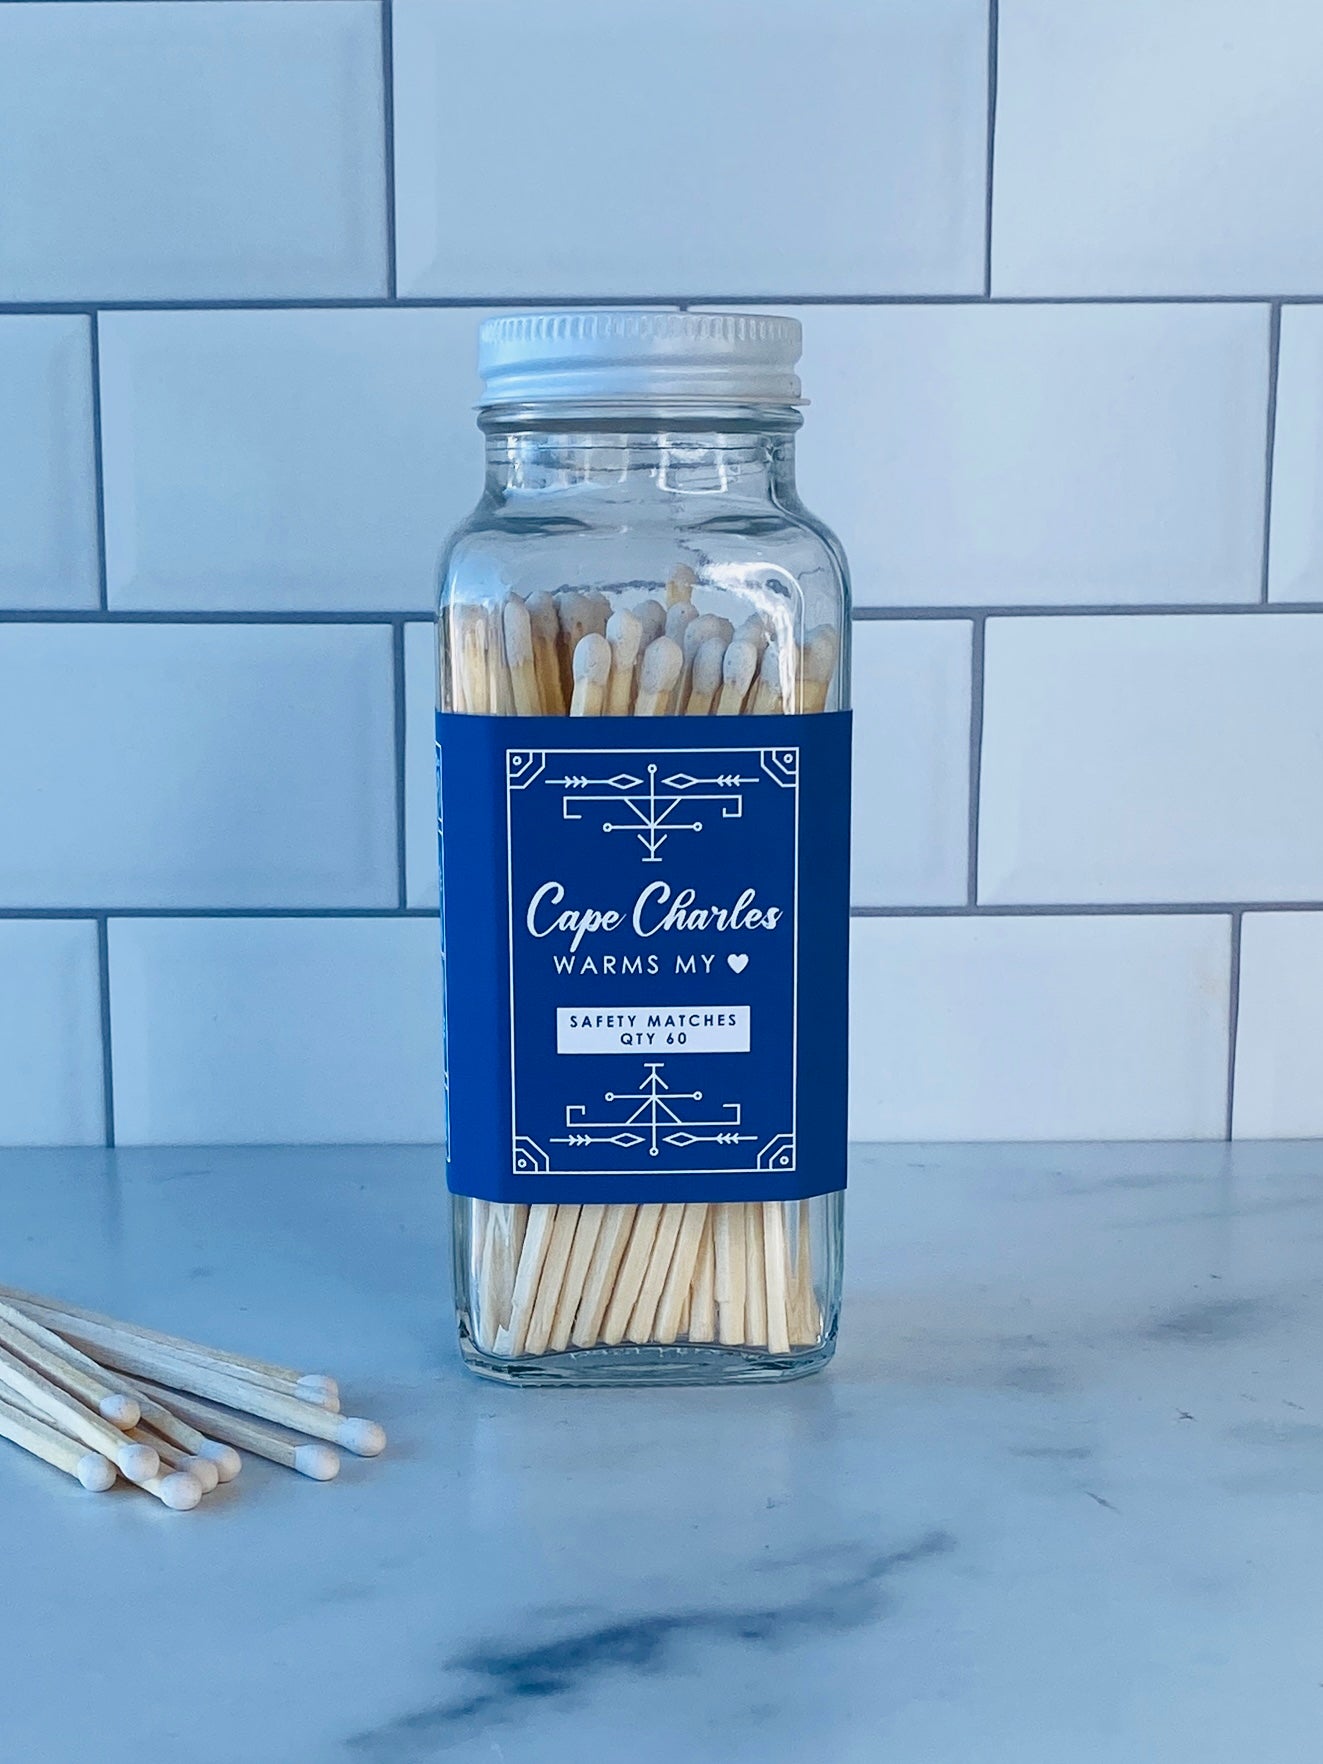 Cape Charles Safety Matches - Cape Charles Warms My Heart